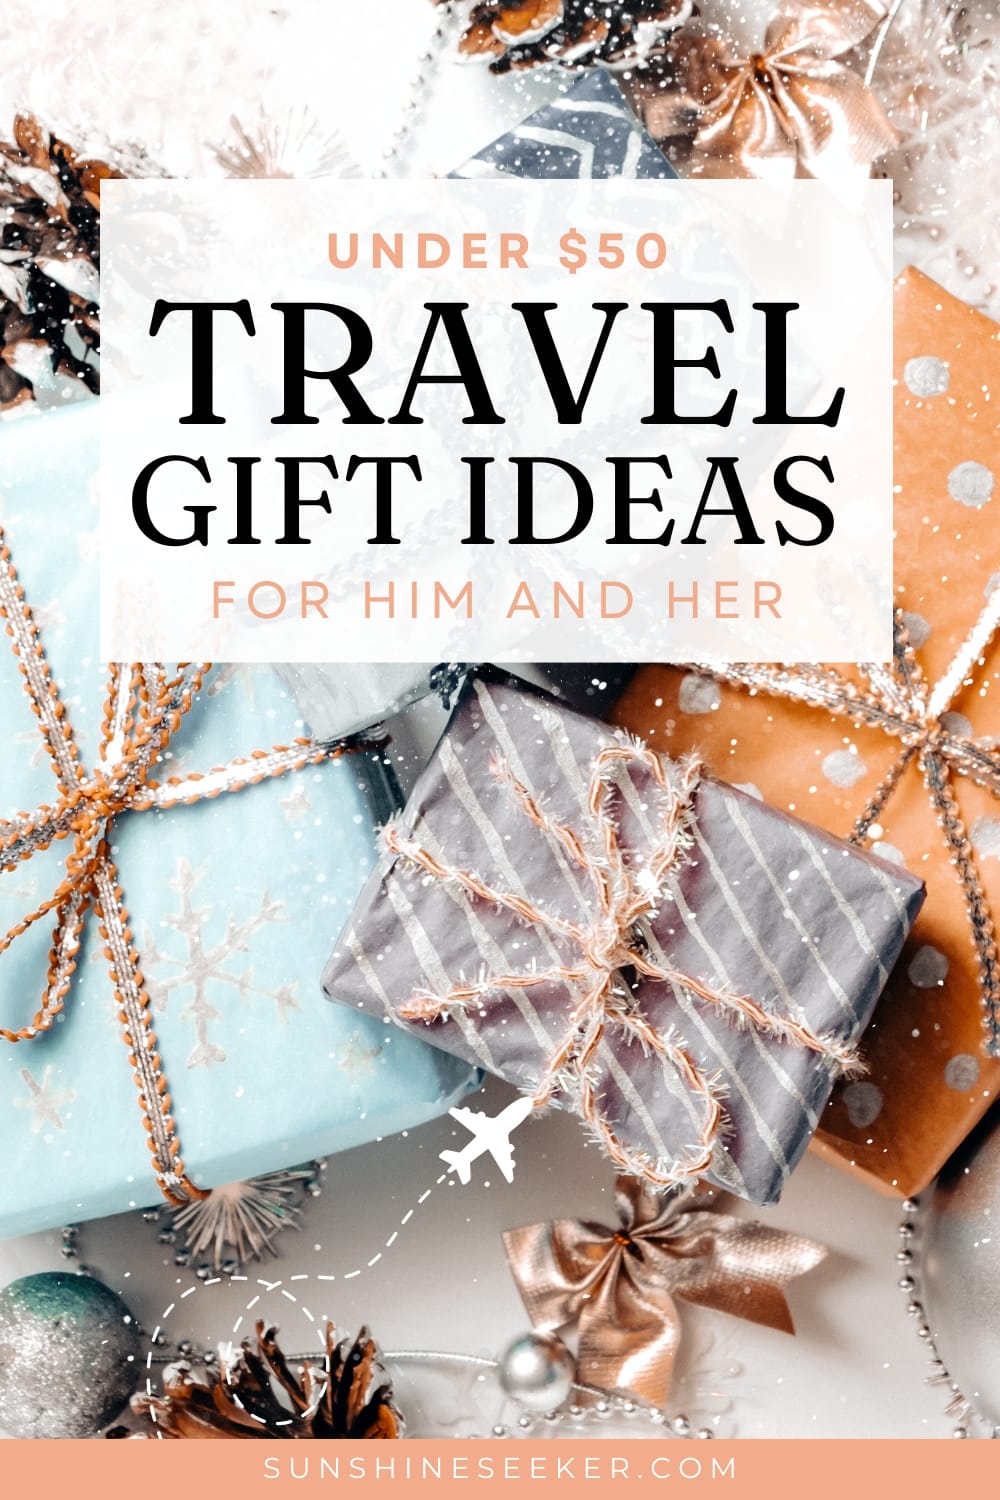 Christmas travel gift ideas under $50 for him and her. These travel gifts are affordable but also useful.